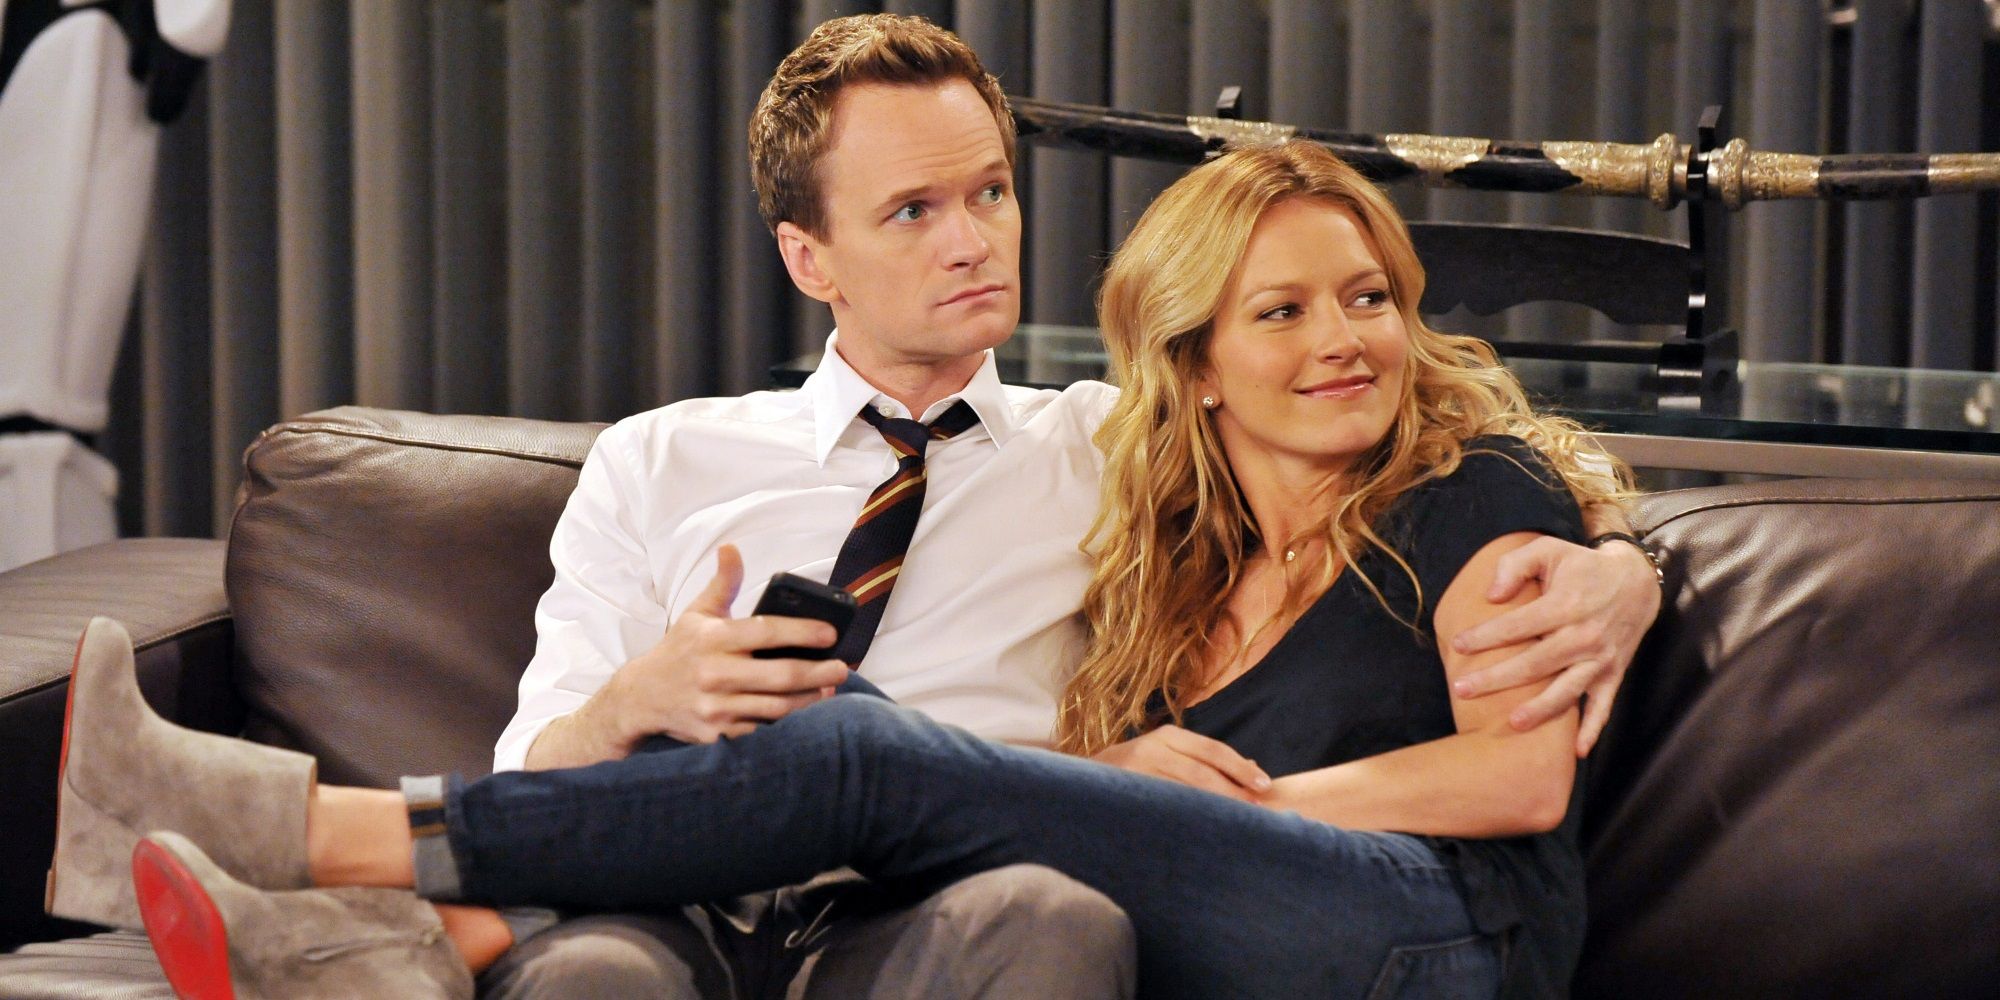 Barney and Quinn on the couch in How I Met Your Mother.